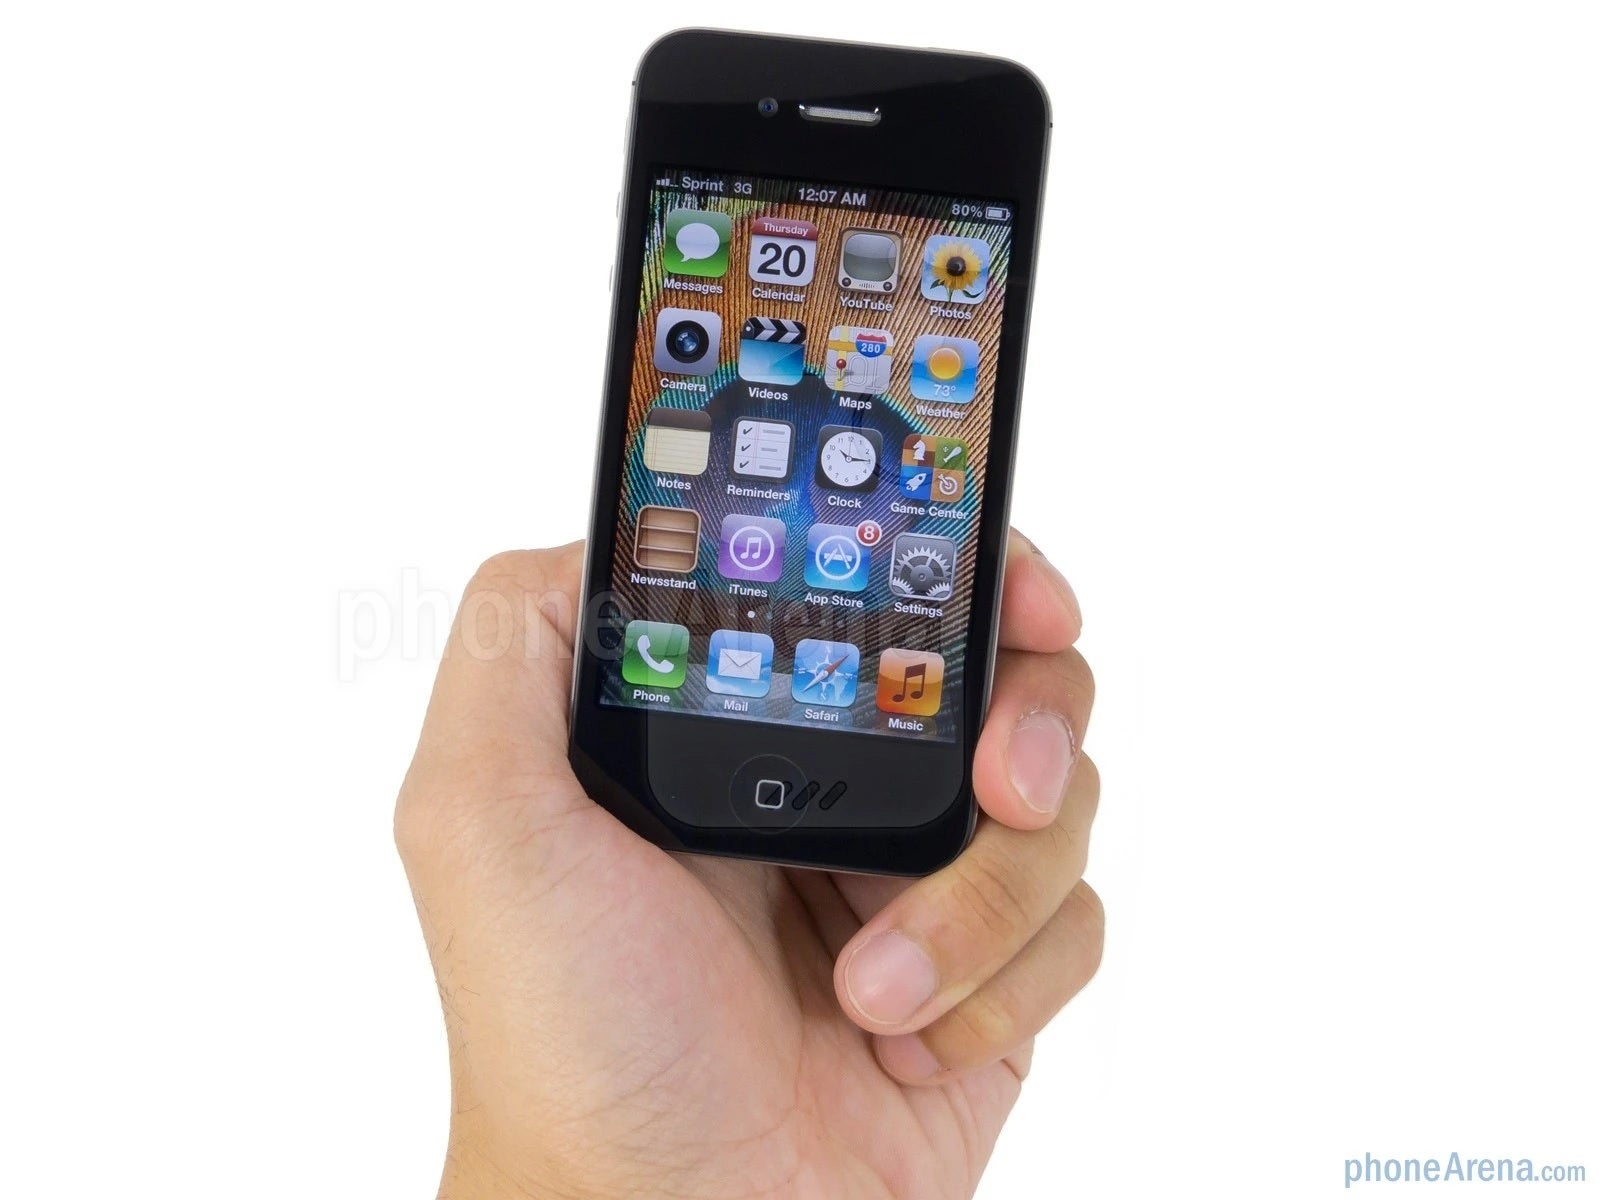 The Apple iPhone 4S - Apple agrees to pay certain iPhone 4S users as much as $15 to settle lawsuit